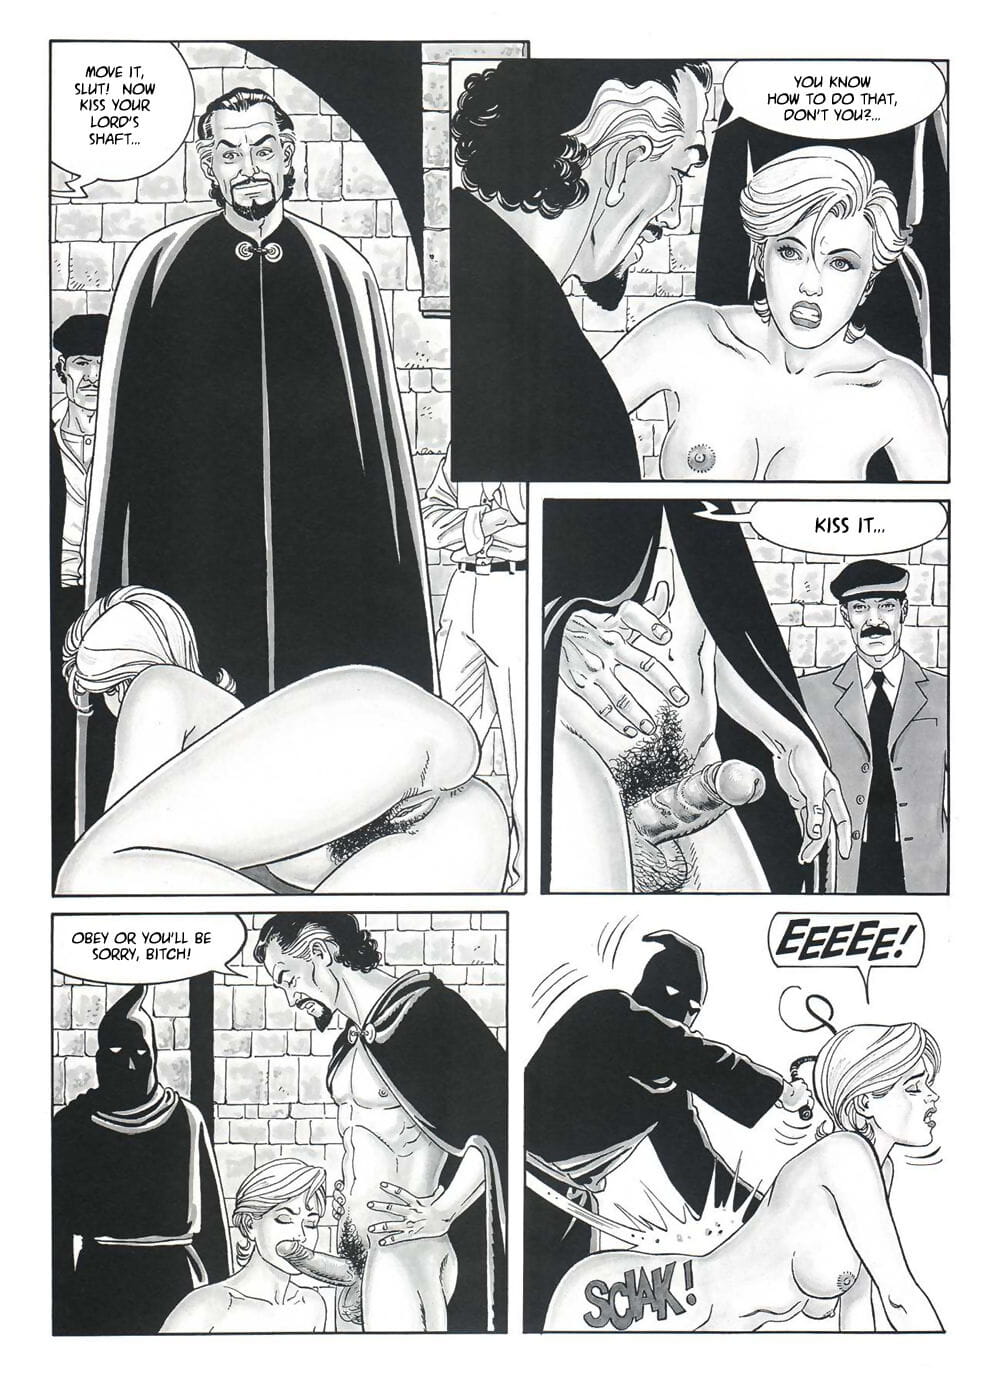 Training and Punishment: Honeymoon In Sicily page 1